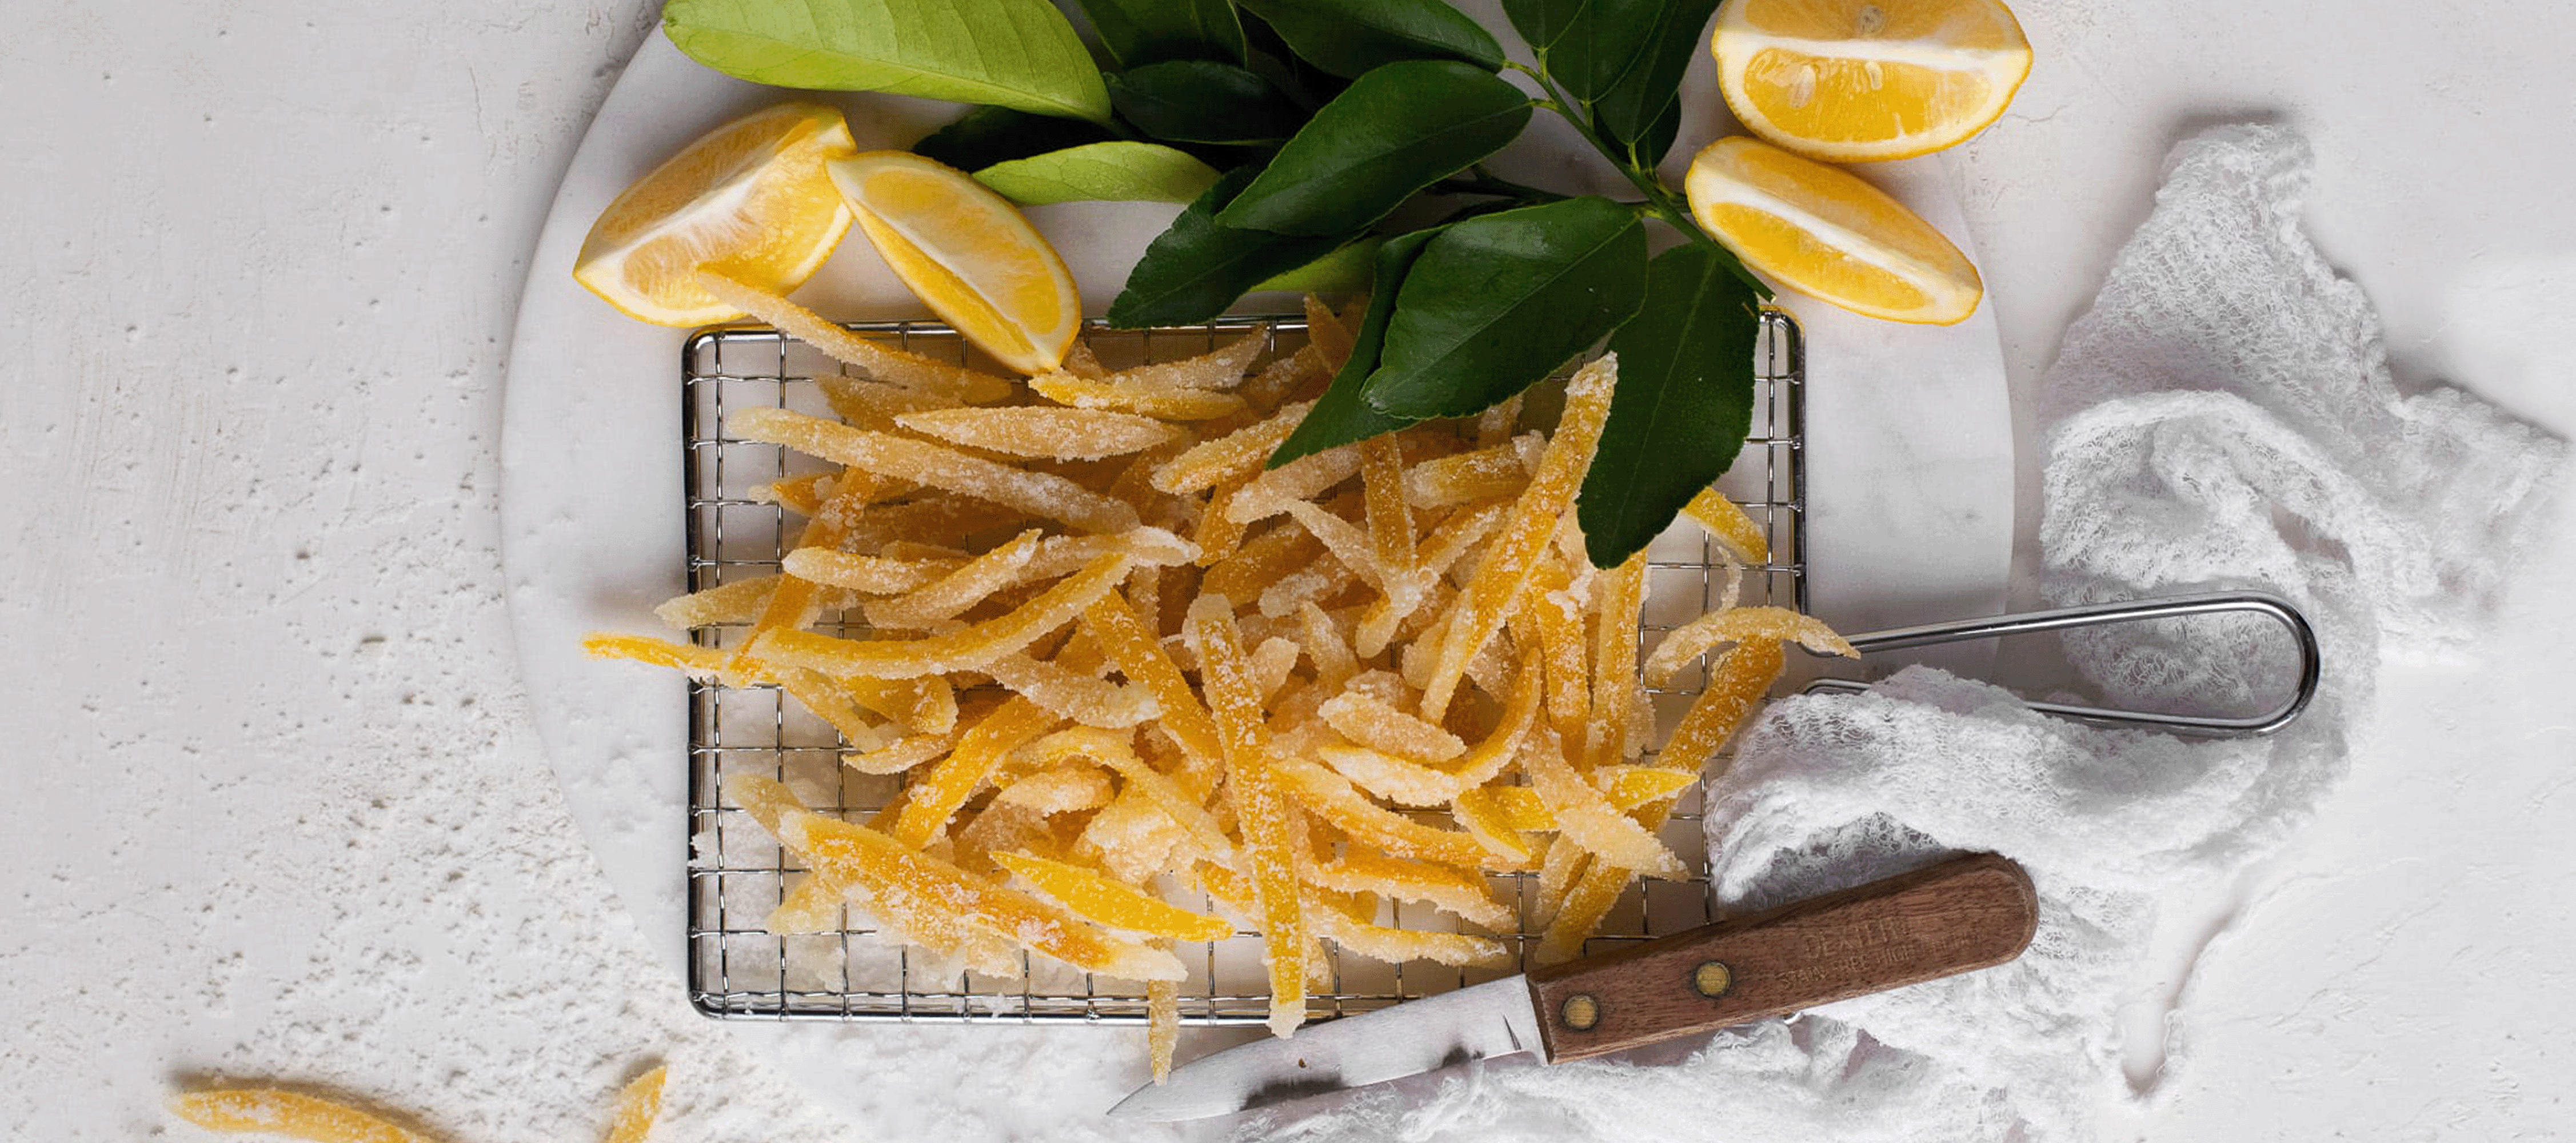 Sundried Candied Citrus Peels